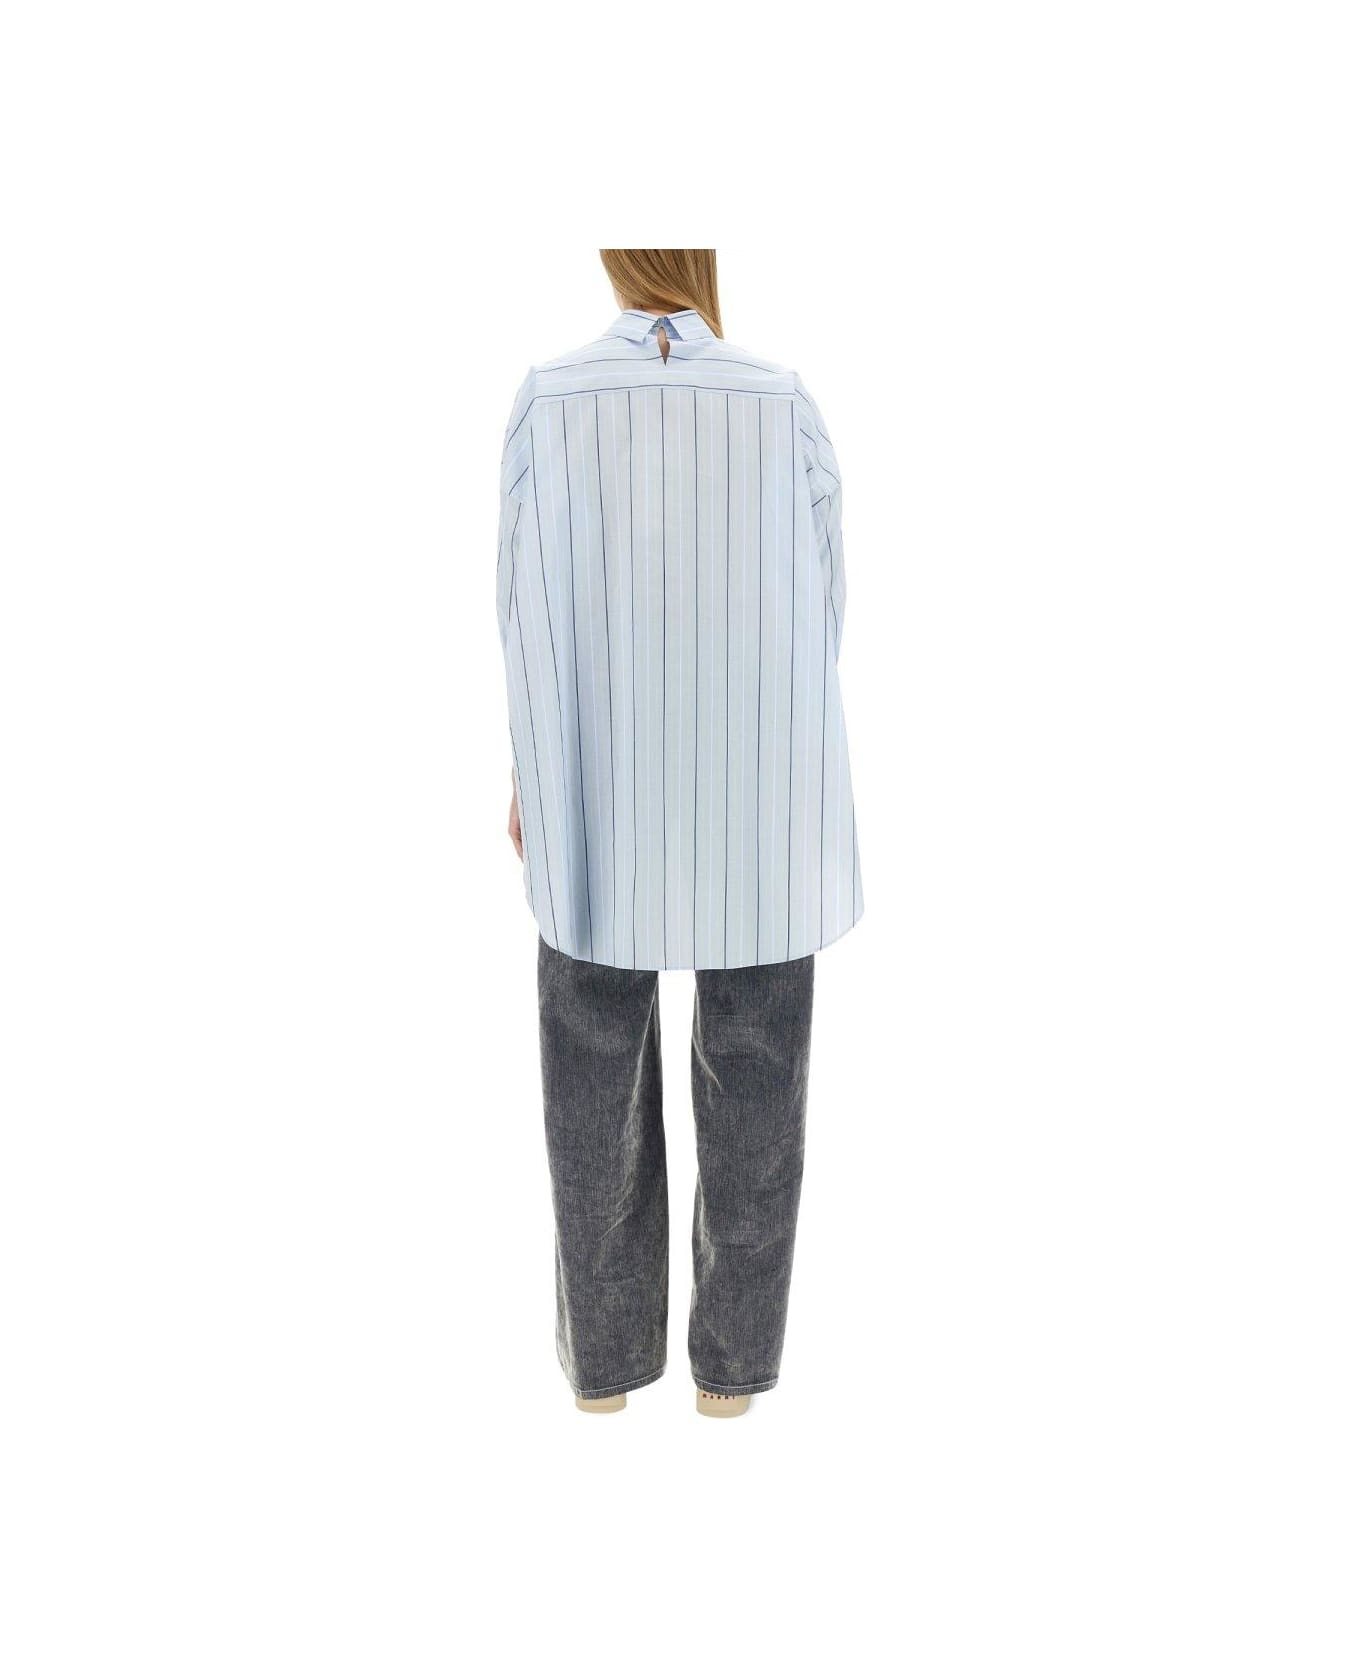 Marni Logo Embroidered Striped Shirt - Clear Blue